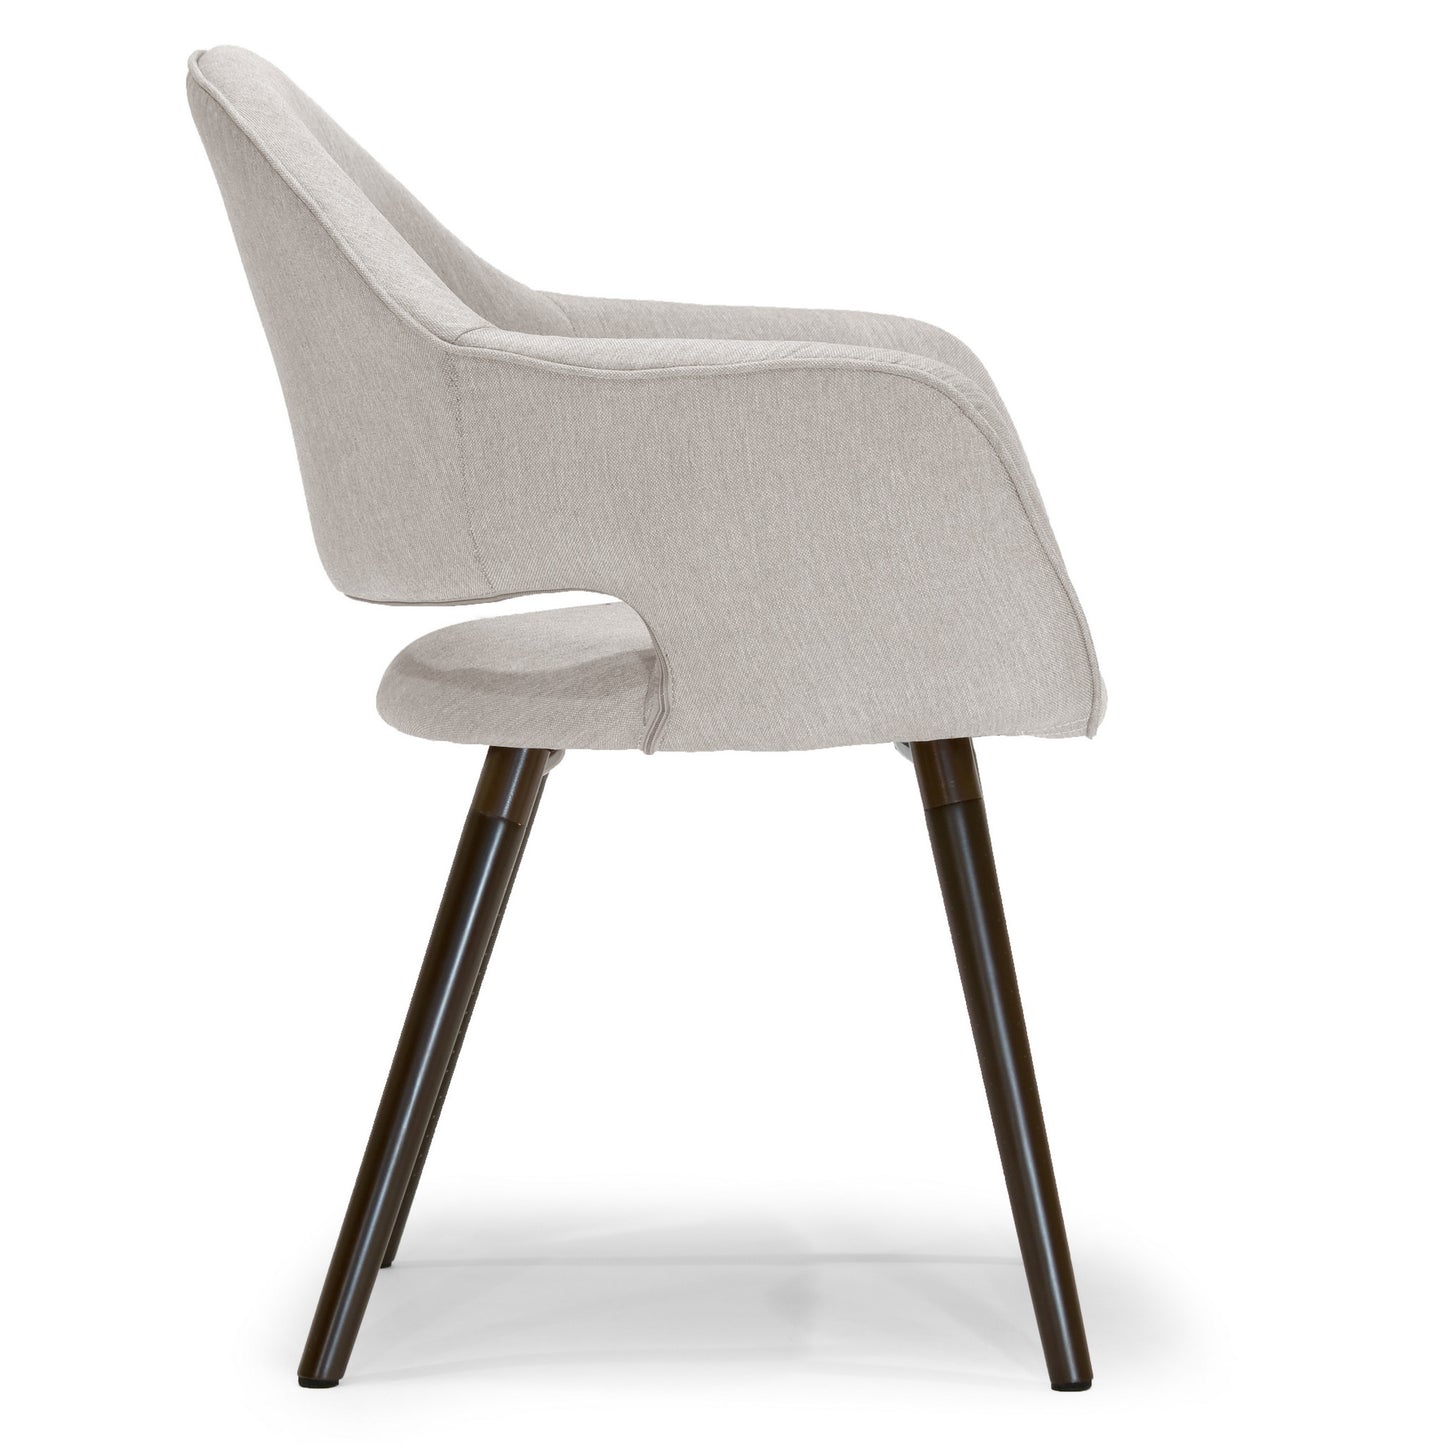 Set of 2 Adel Modern Beige Arm Chair Dining Chair with Beech Legs